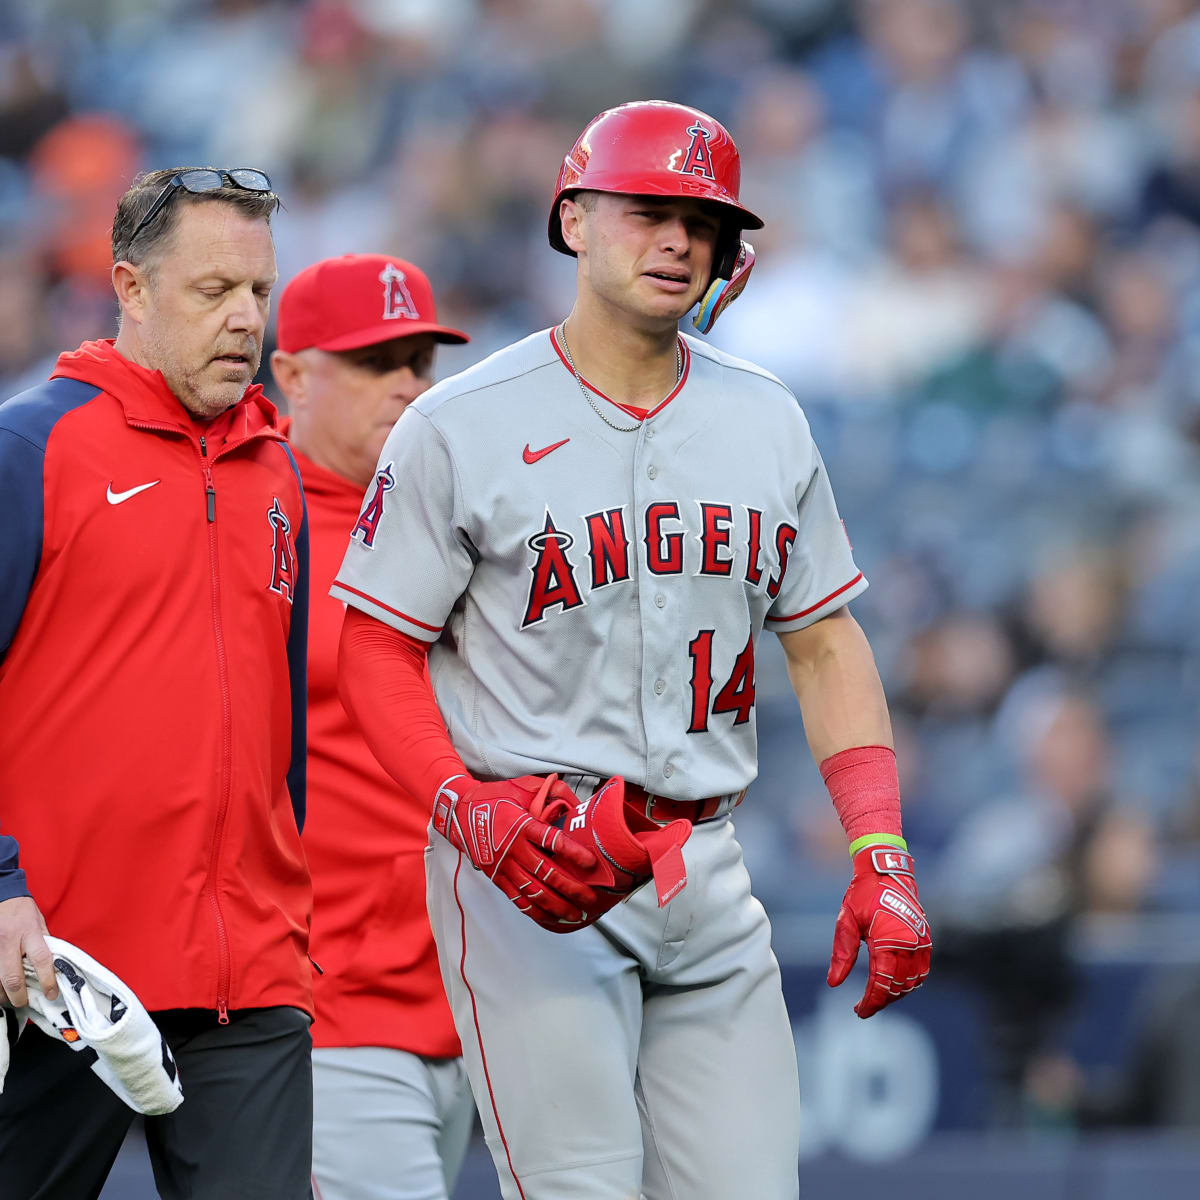 Trout joins Harper on All-Star sidelines, 6 players added